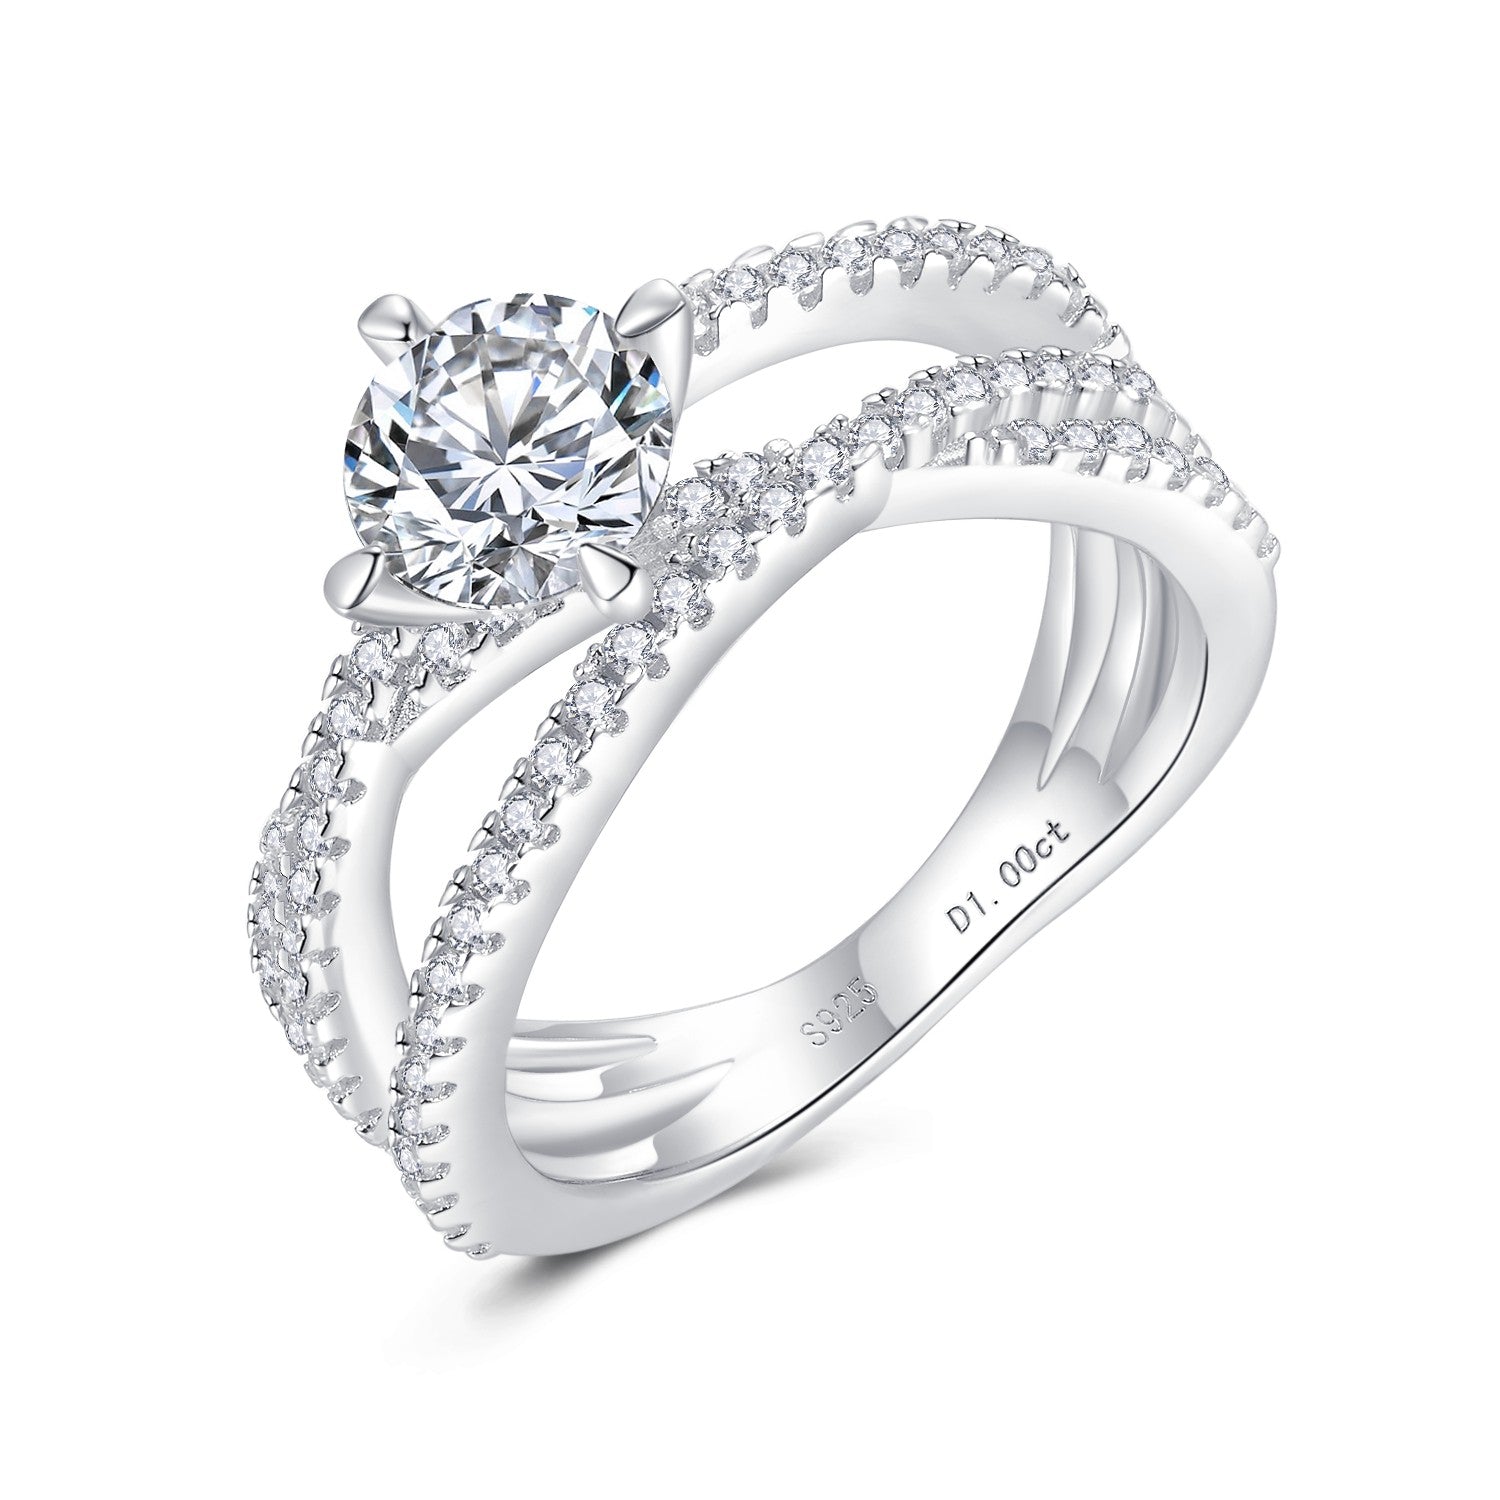 Diana Intertwined Ring